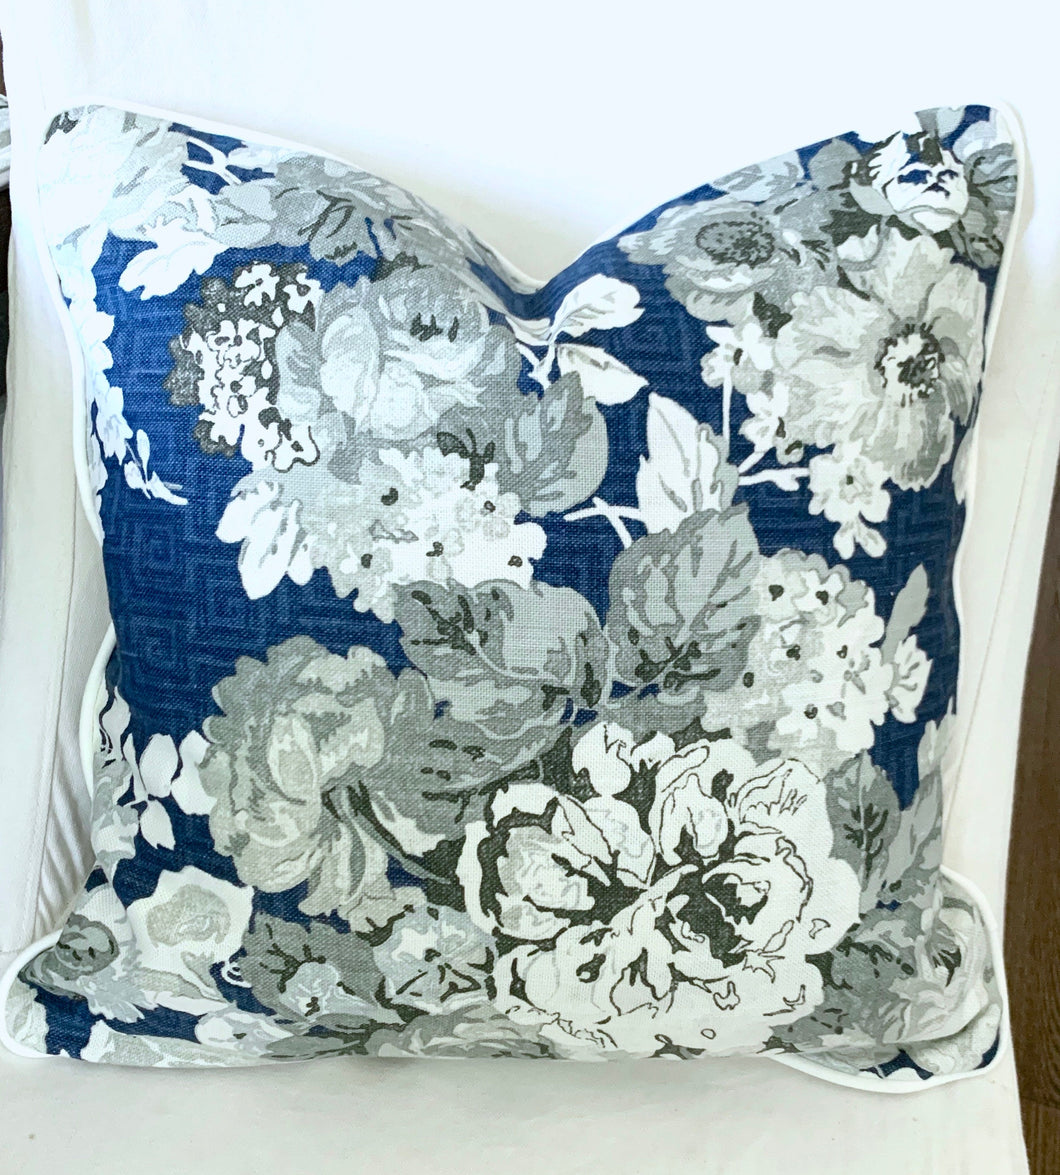 SALE Thibaut Wild Floral navy pillows 20x20 white welt piping Only two left honshu pillow cover large floral pillow navy blue cream grey